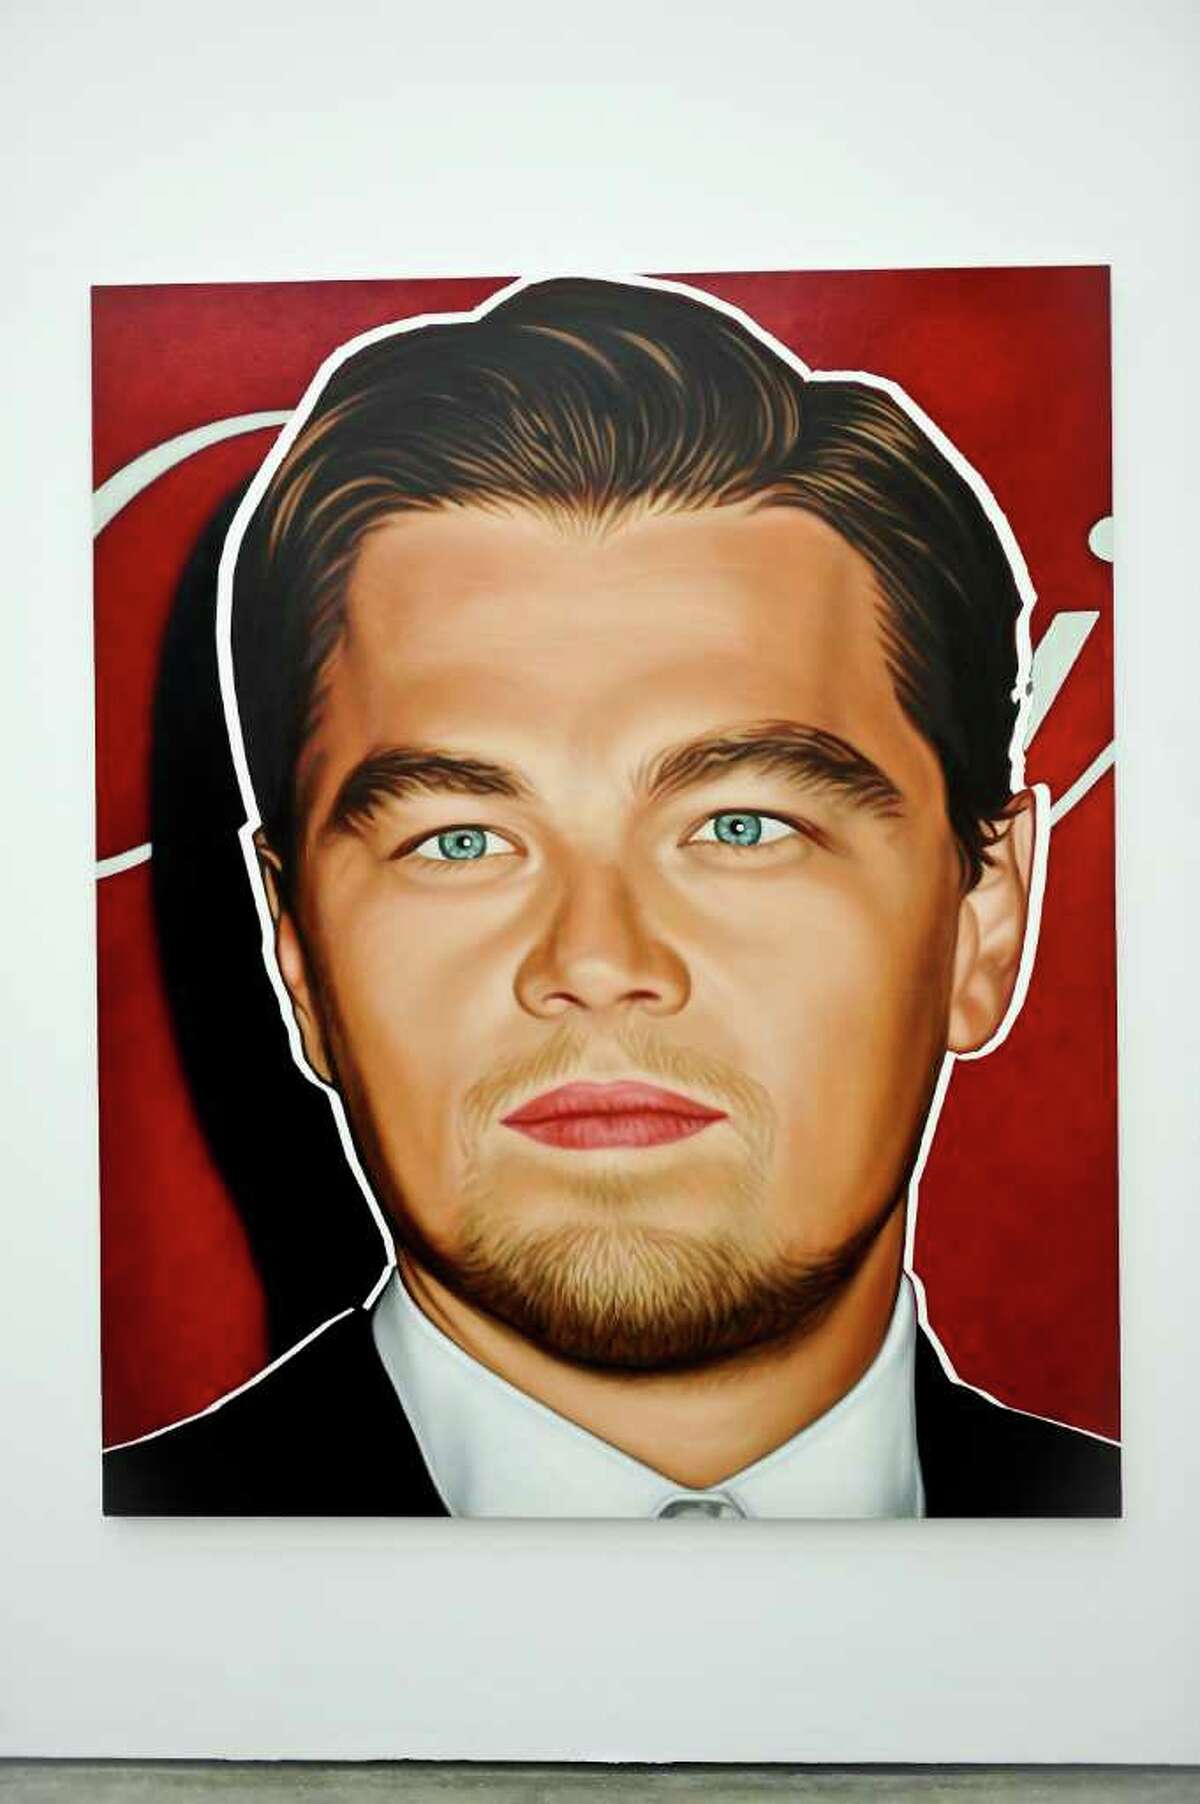 Here's a former 'Growing Pains' bit character actor who fared better. Leonardo DiCaprio played Luke Bower in 23 episodes of the show before moving on to become such a Hollywood icon that artist Richard Phillips decided to make this painting of him.